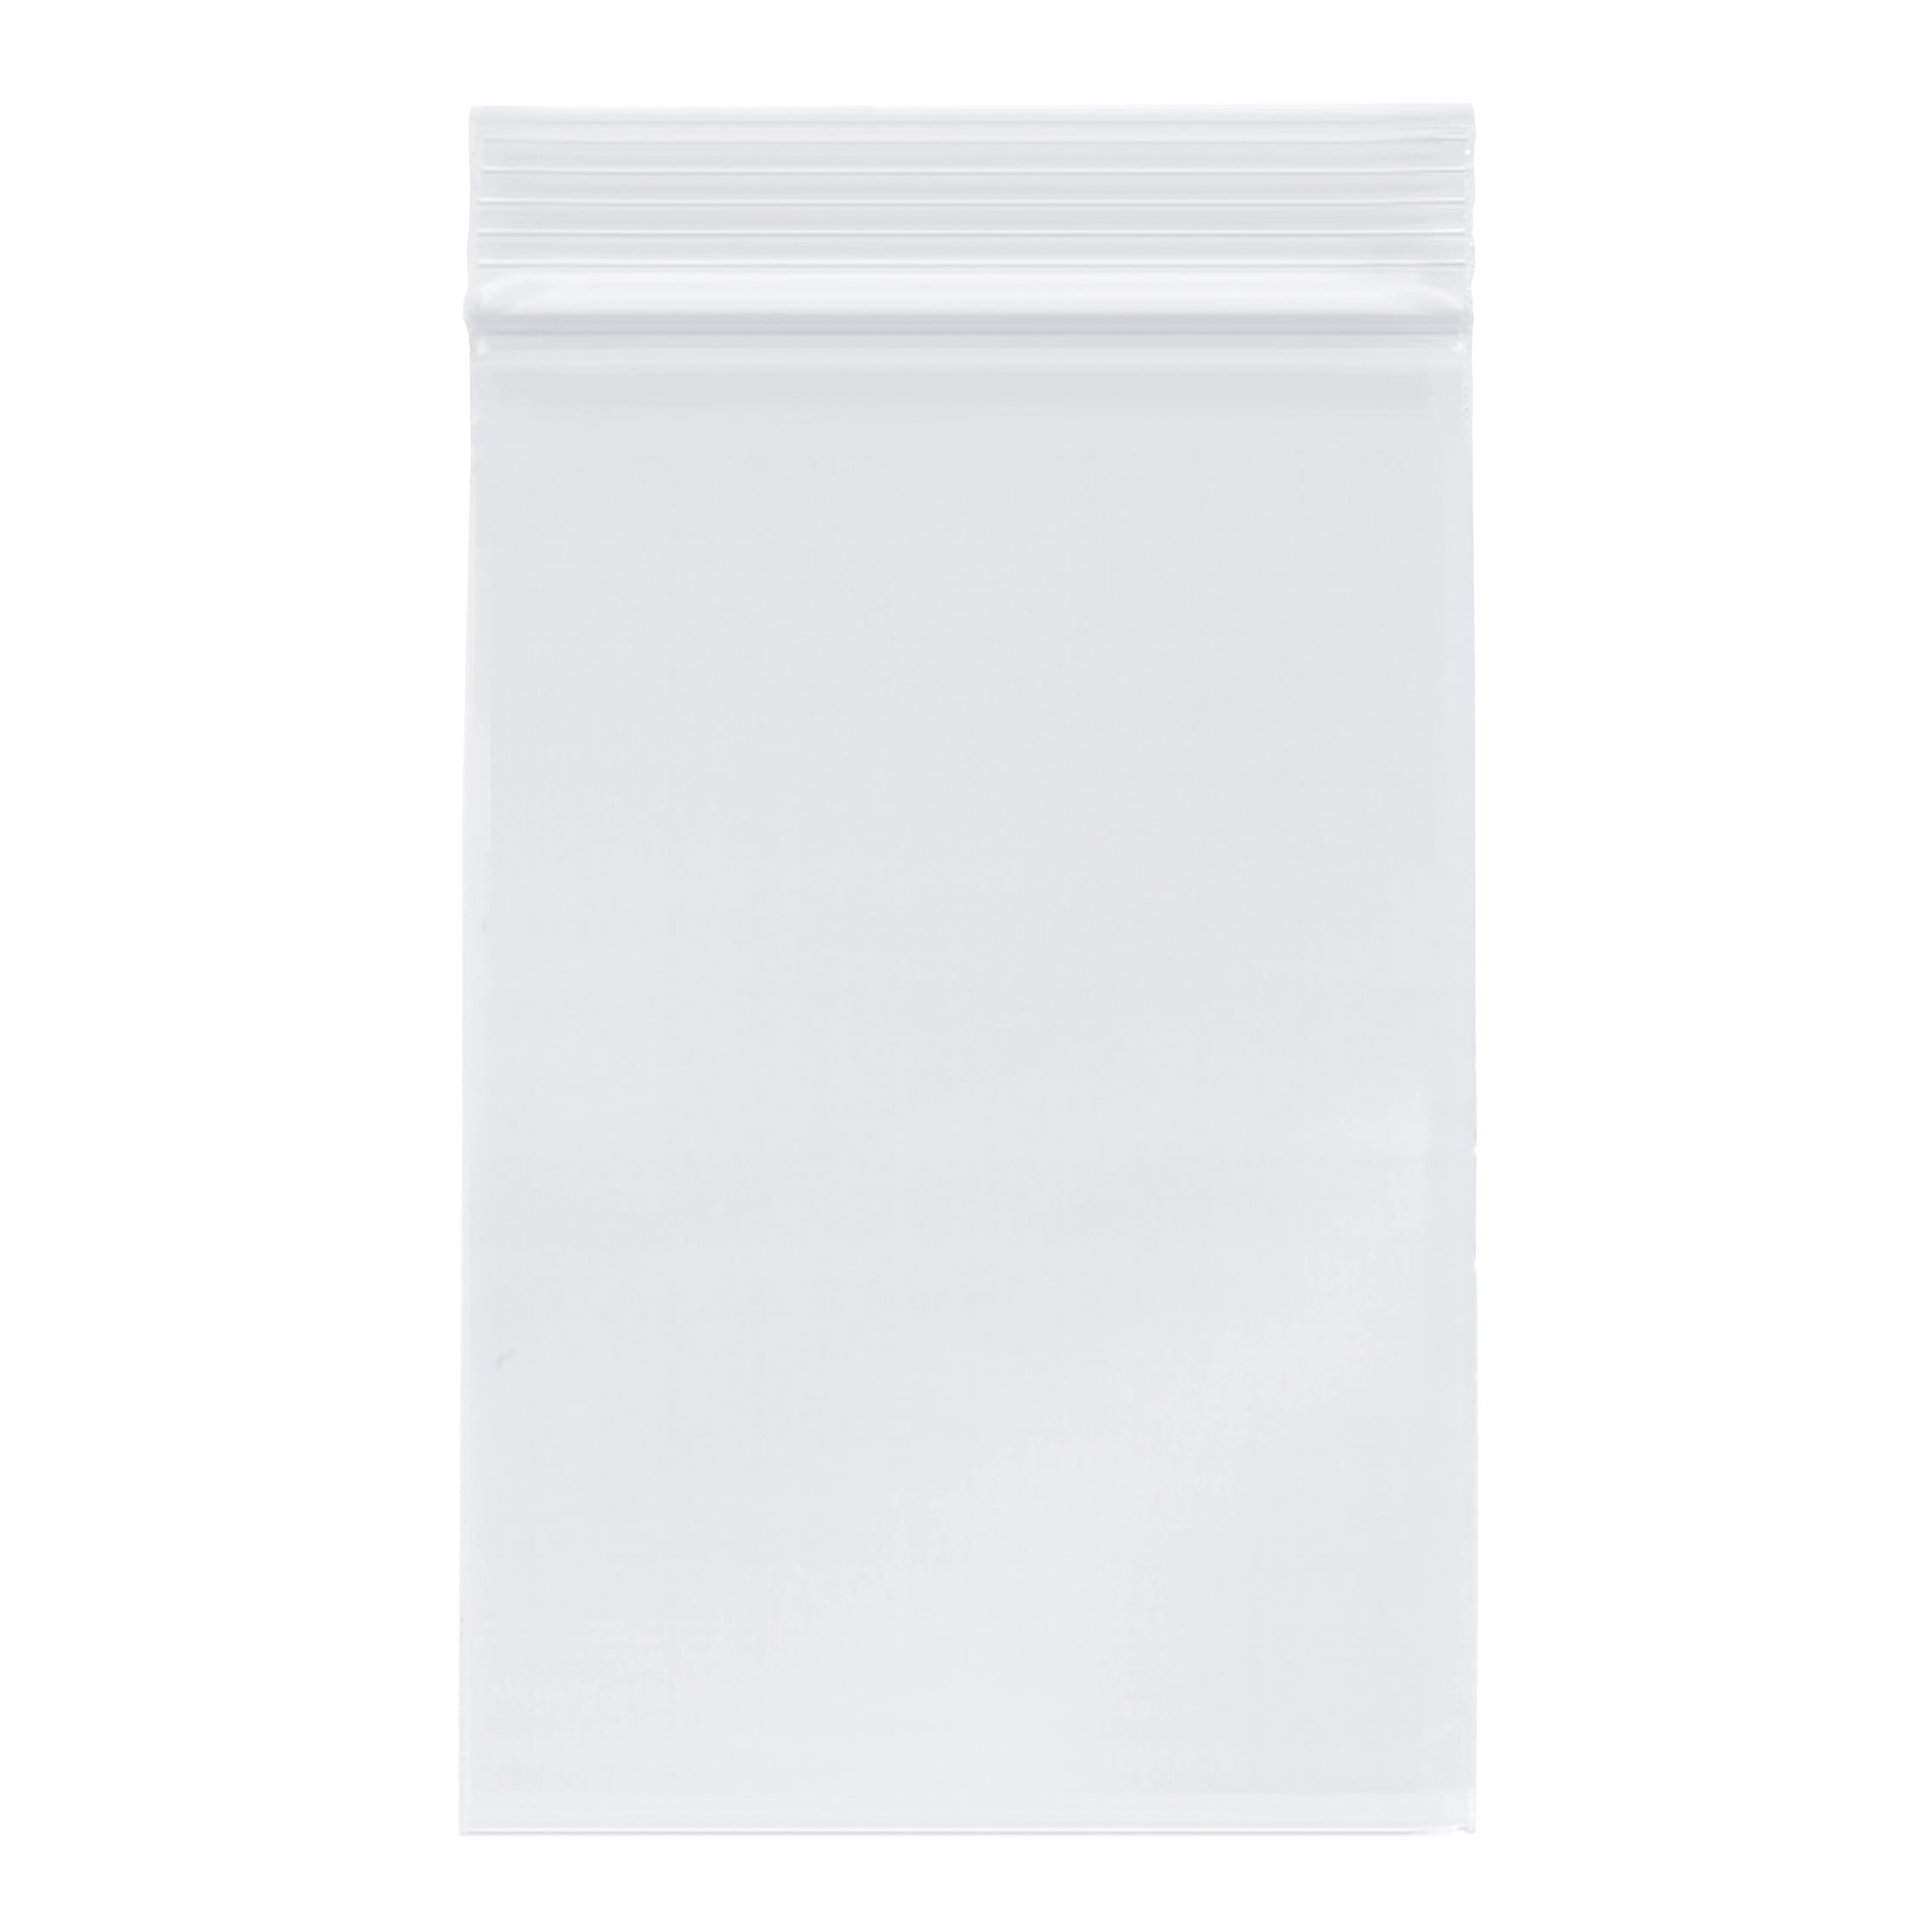 Top Seal Bead Plastic Polybags 2000 Clear Resealable Zipper Bags 4 Mil 6" x 4" 